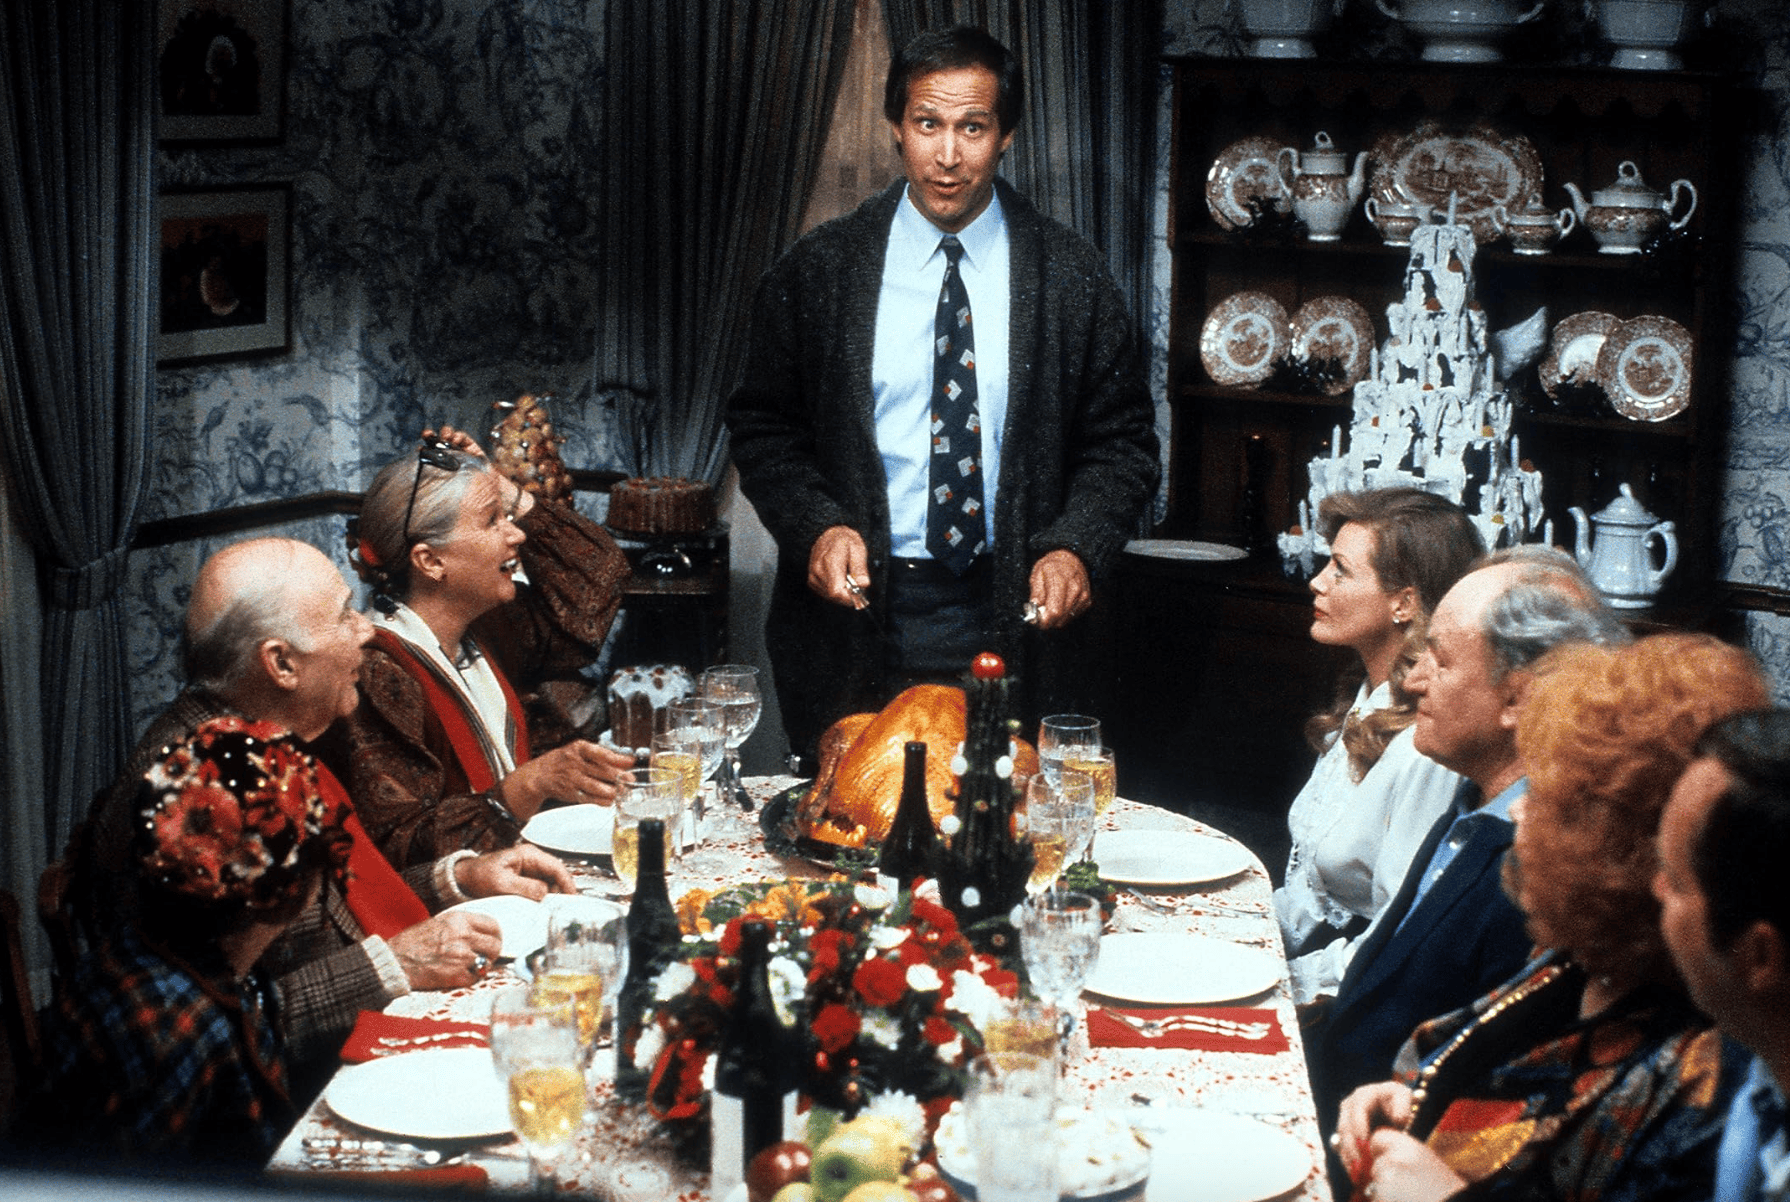 A dysfunctional family gathers around the dinner table in this image from Warner Bros.